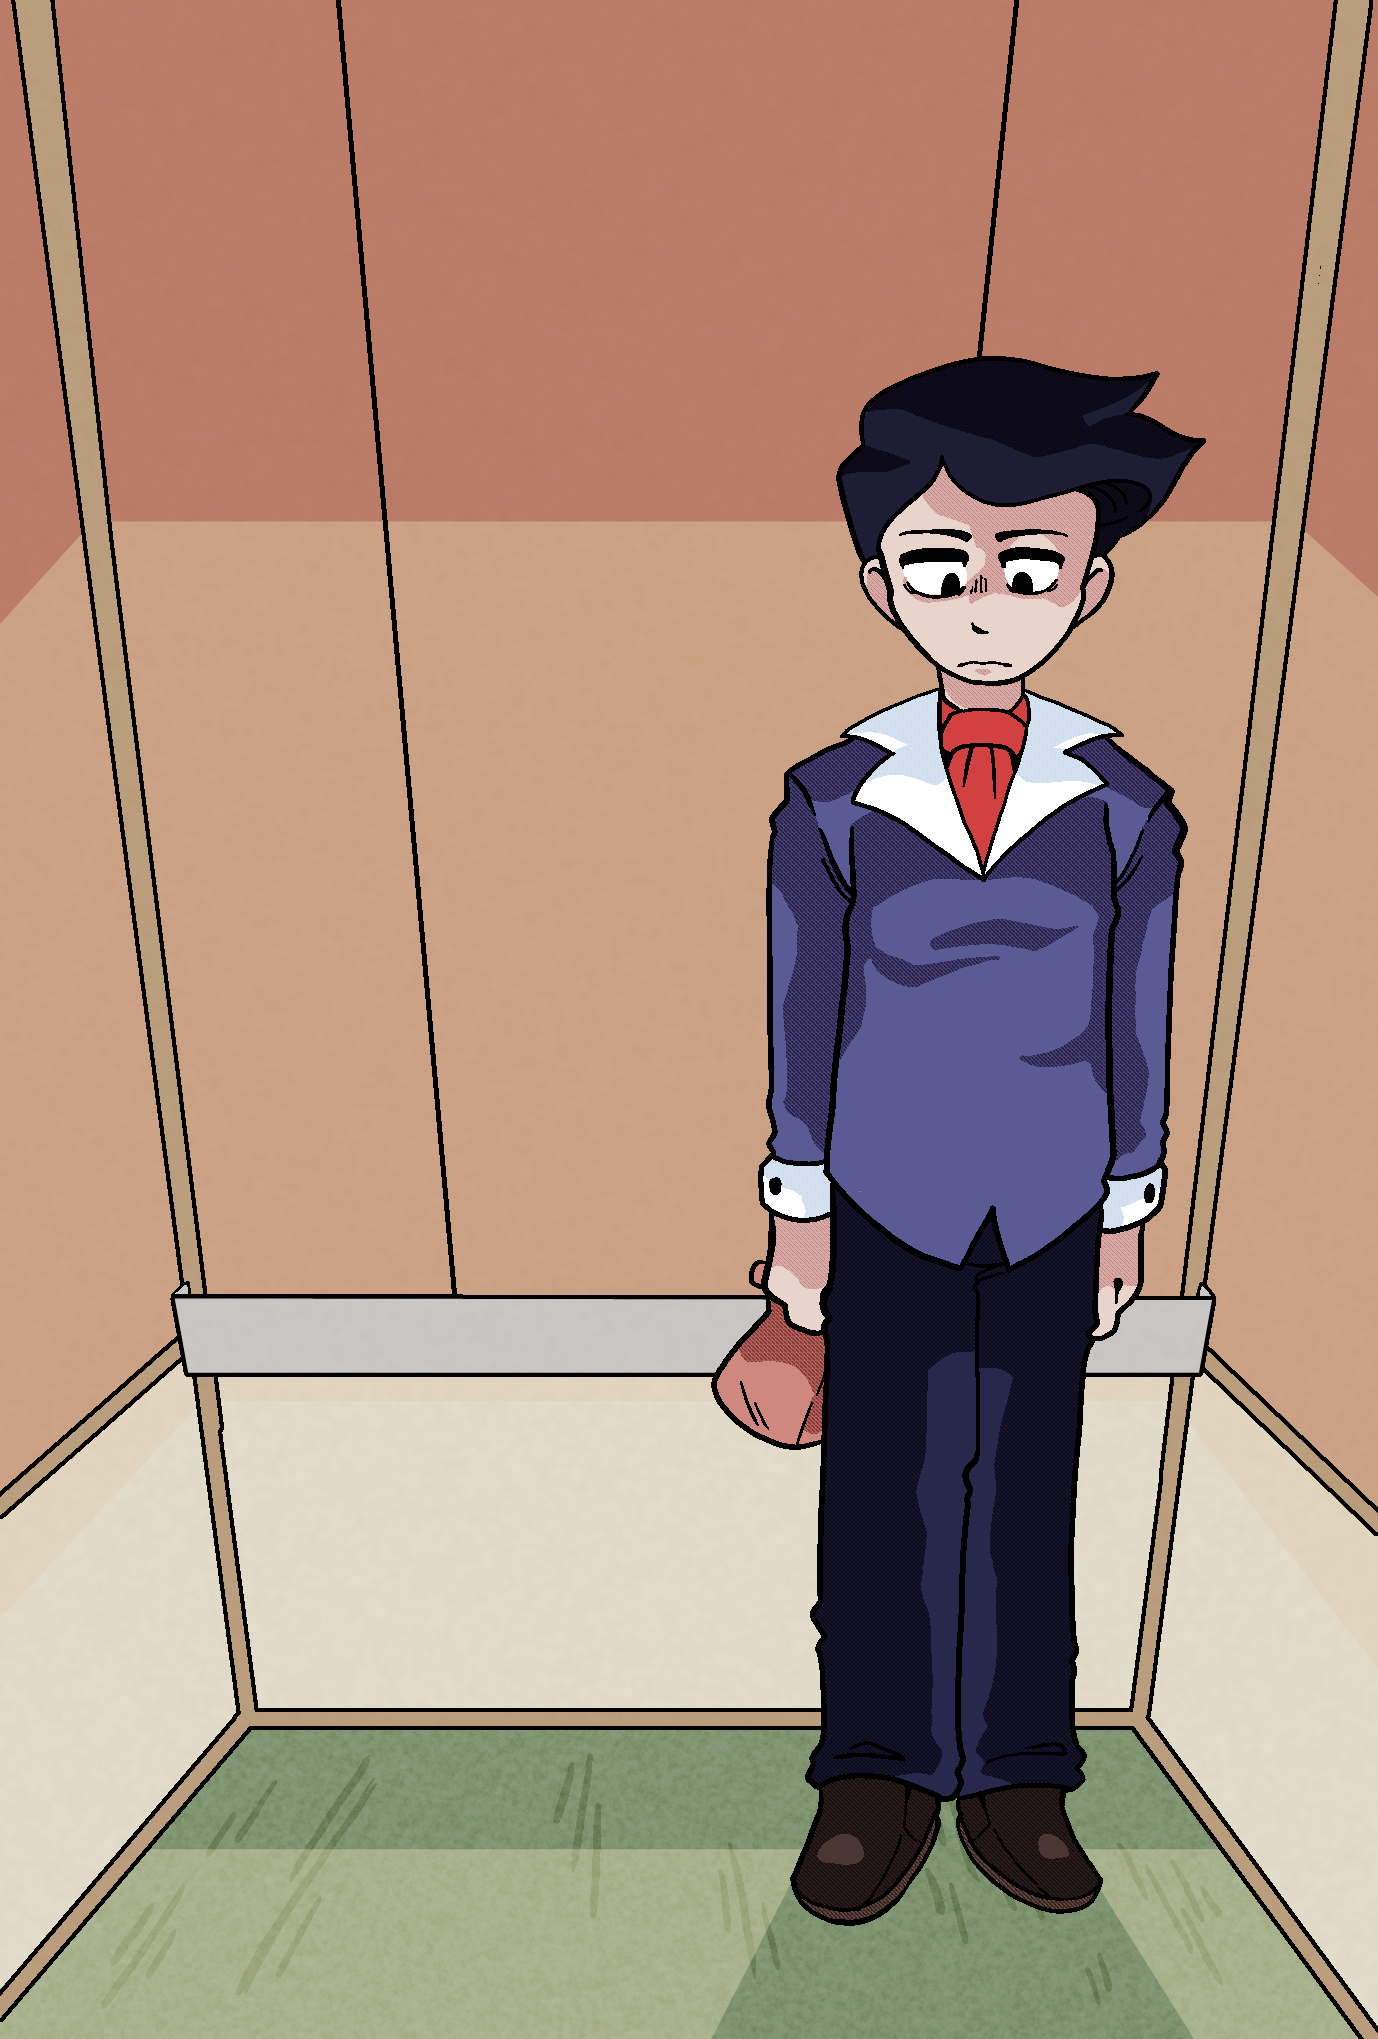 Sam from Commonplace, standing quietly alone in an elevator.